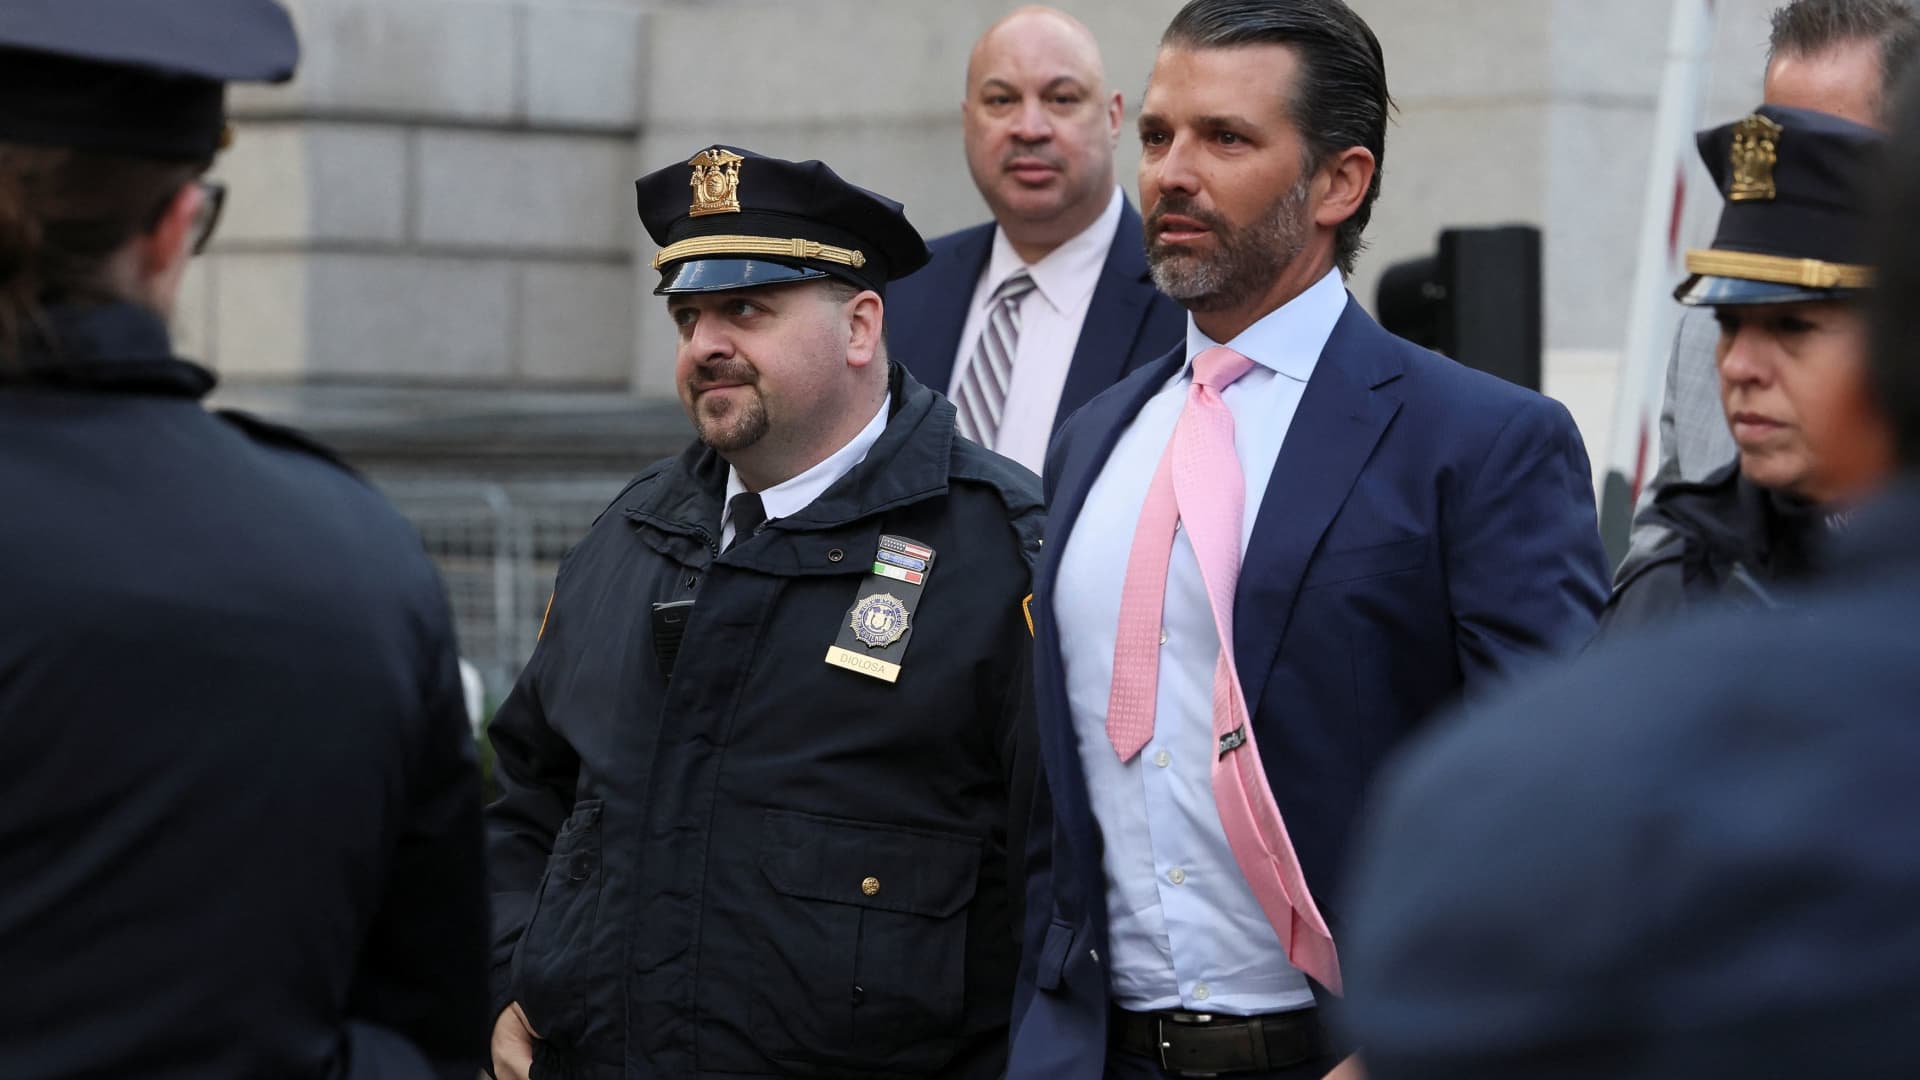 Former U.S. President Donald Trump's son and co-defendant, Donald Trump Jr., arrives to attend the Trump Organization civil fraud trial, in New York State Supreme Court in the Manhattan borough of New York City, U.S., November 1, 2023.